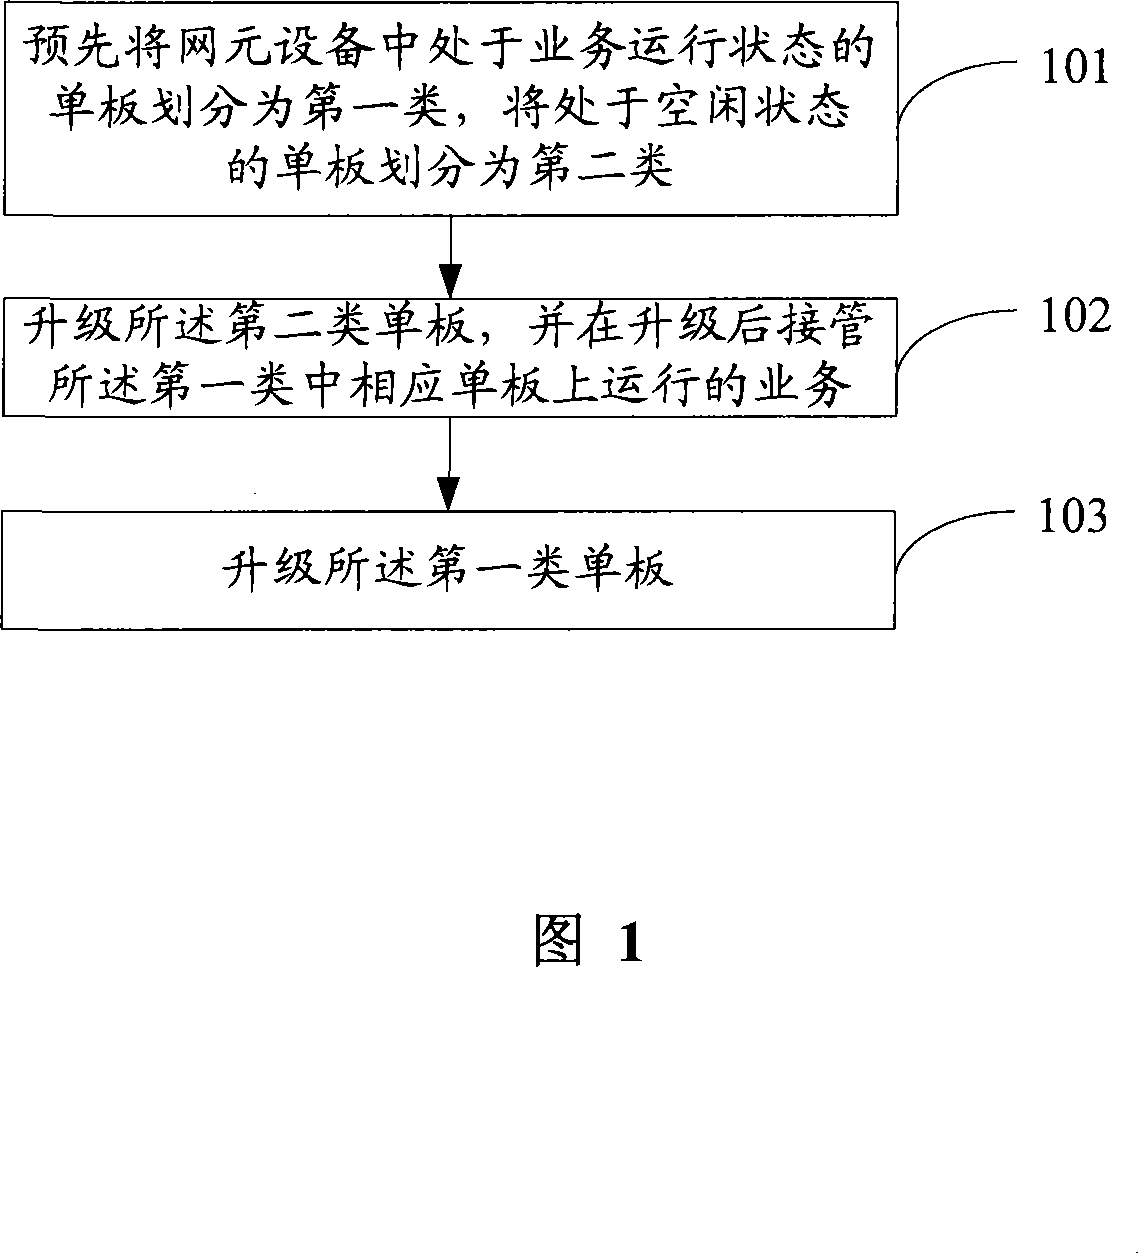 Method and device of implementing network element updating